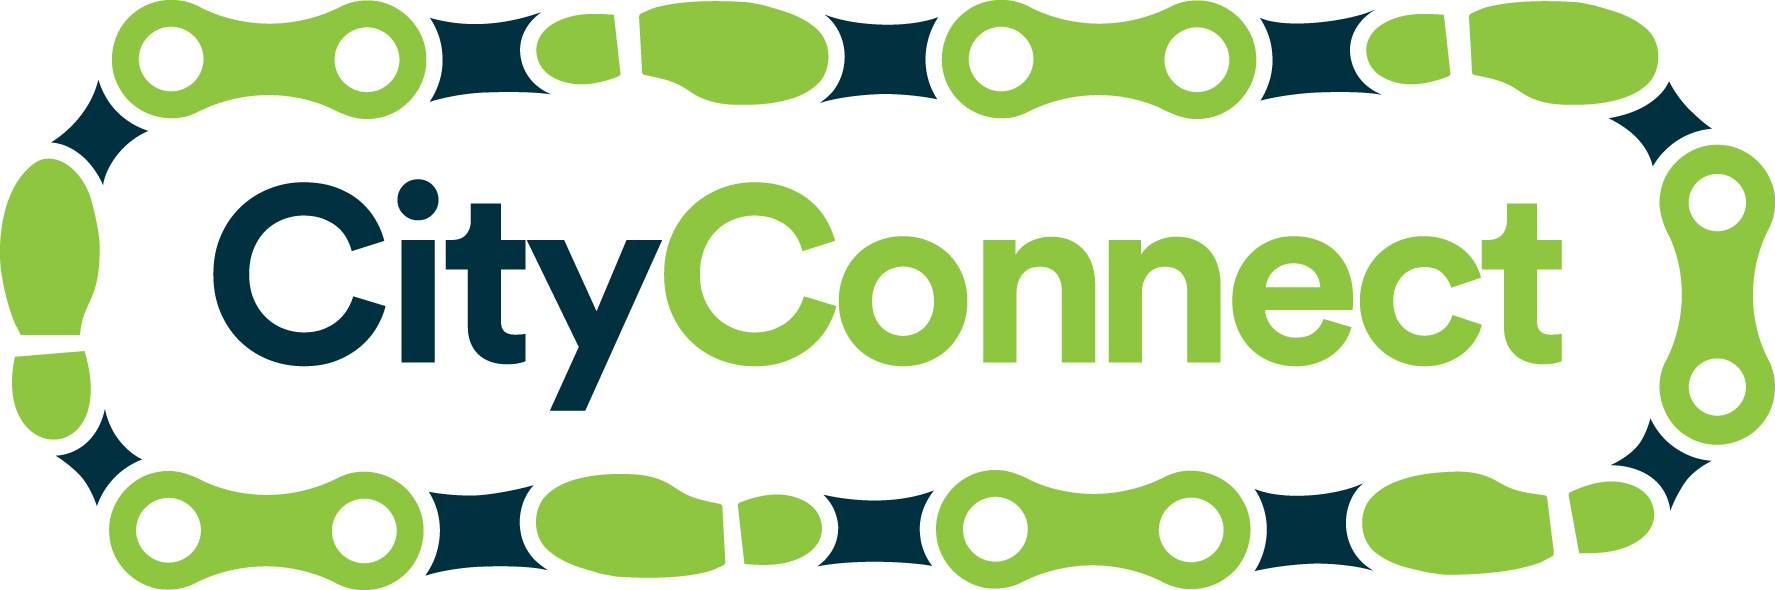 What is CityConnect? - CityConnect